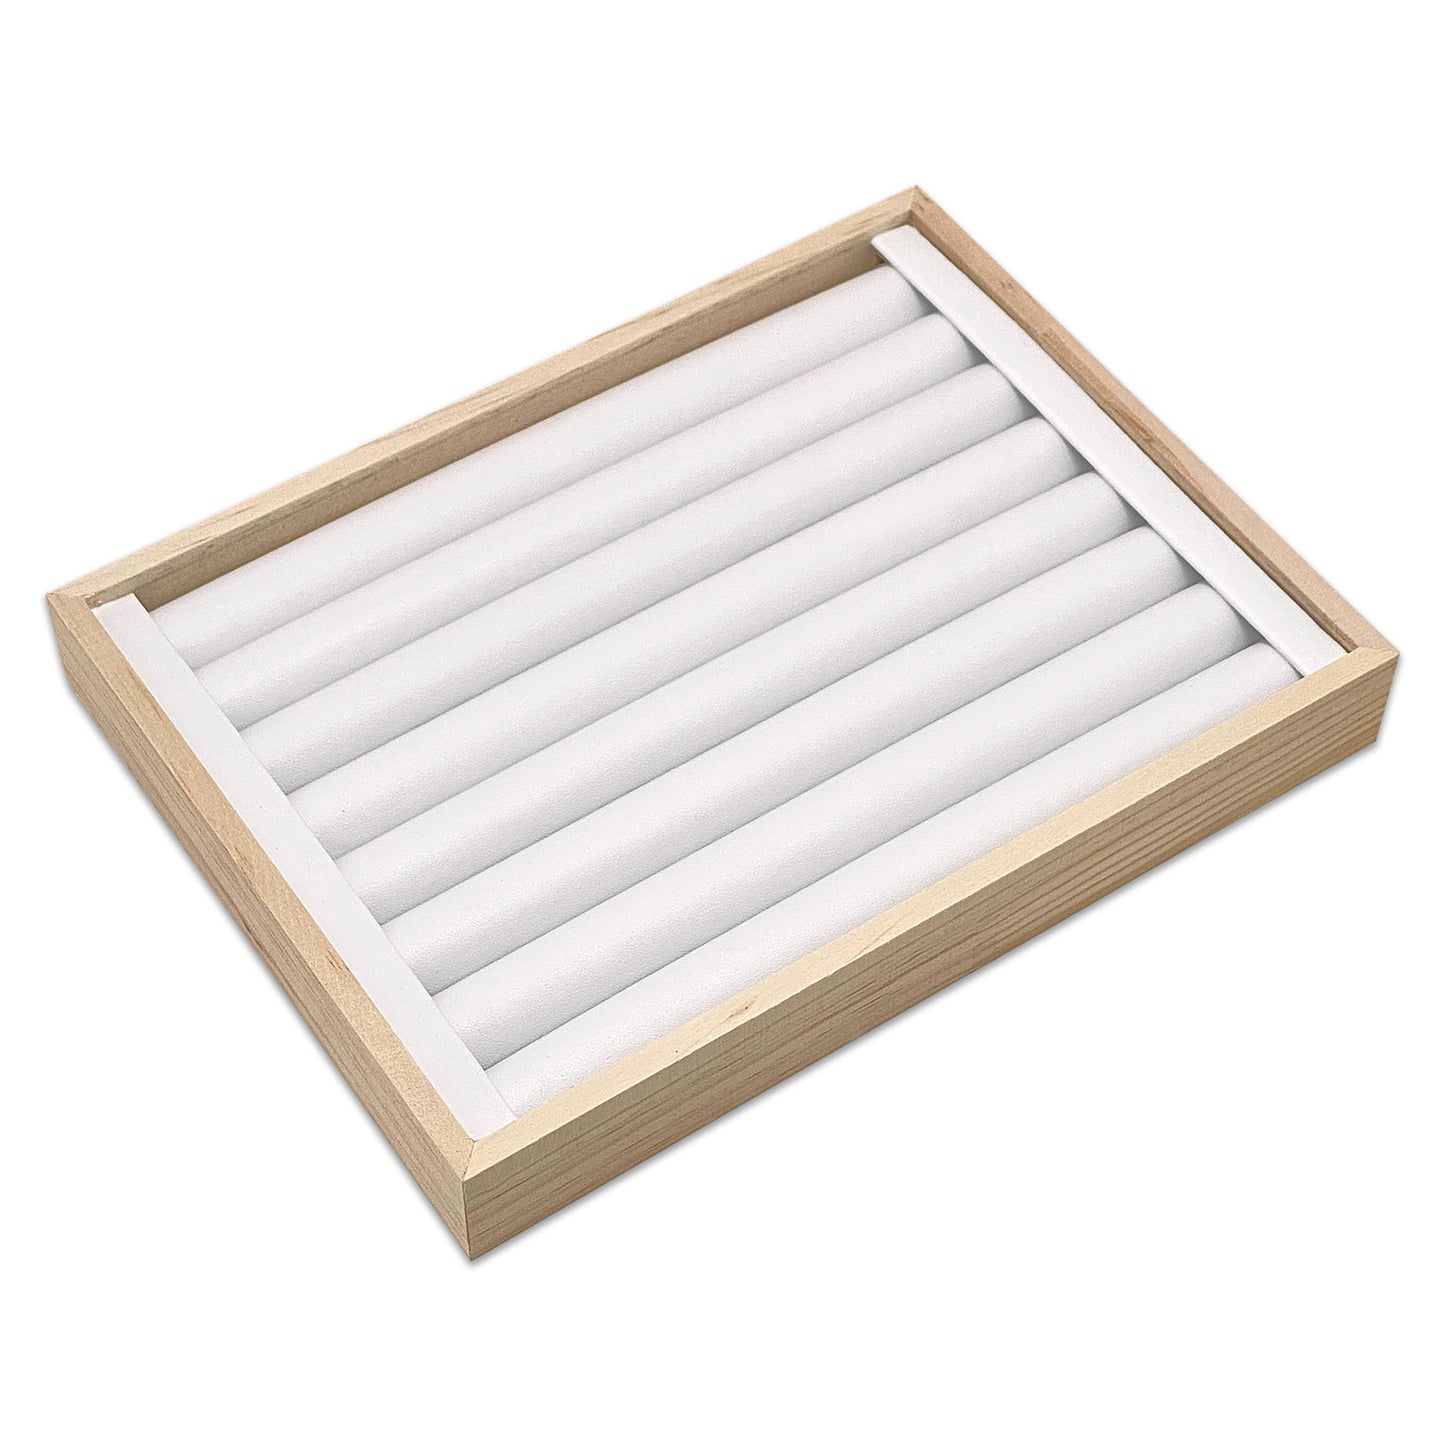 9 1/2" x 7" Wood White Leatherette 8 Roll Ring Display Tray